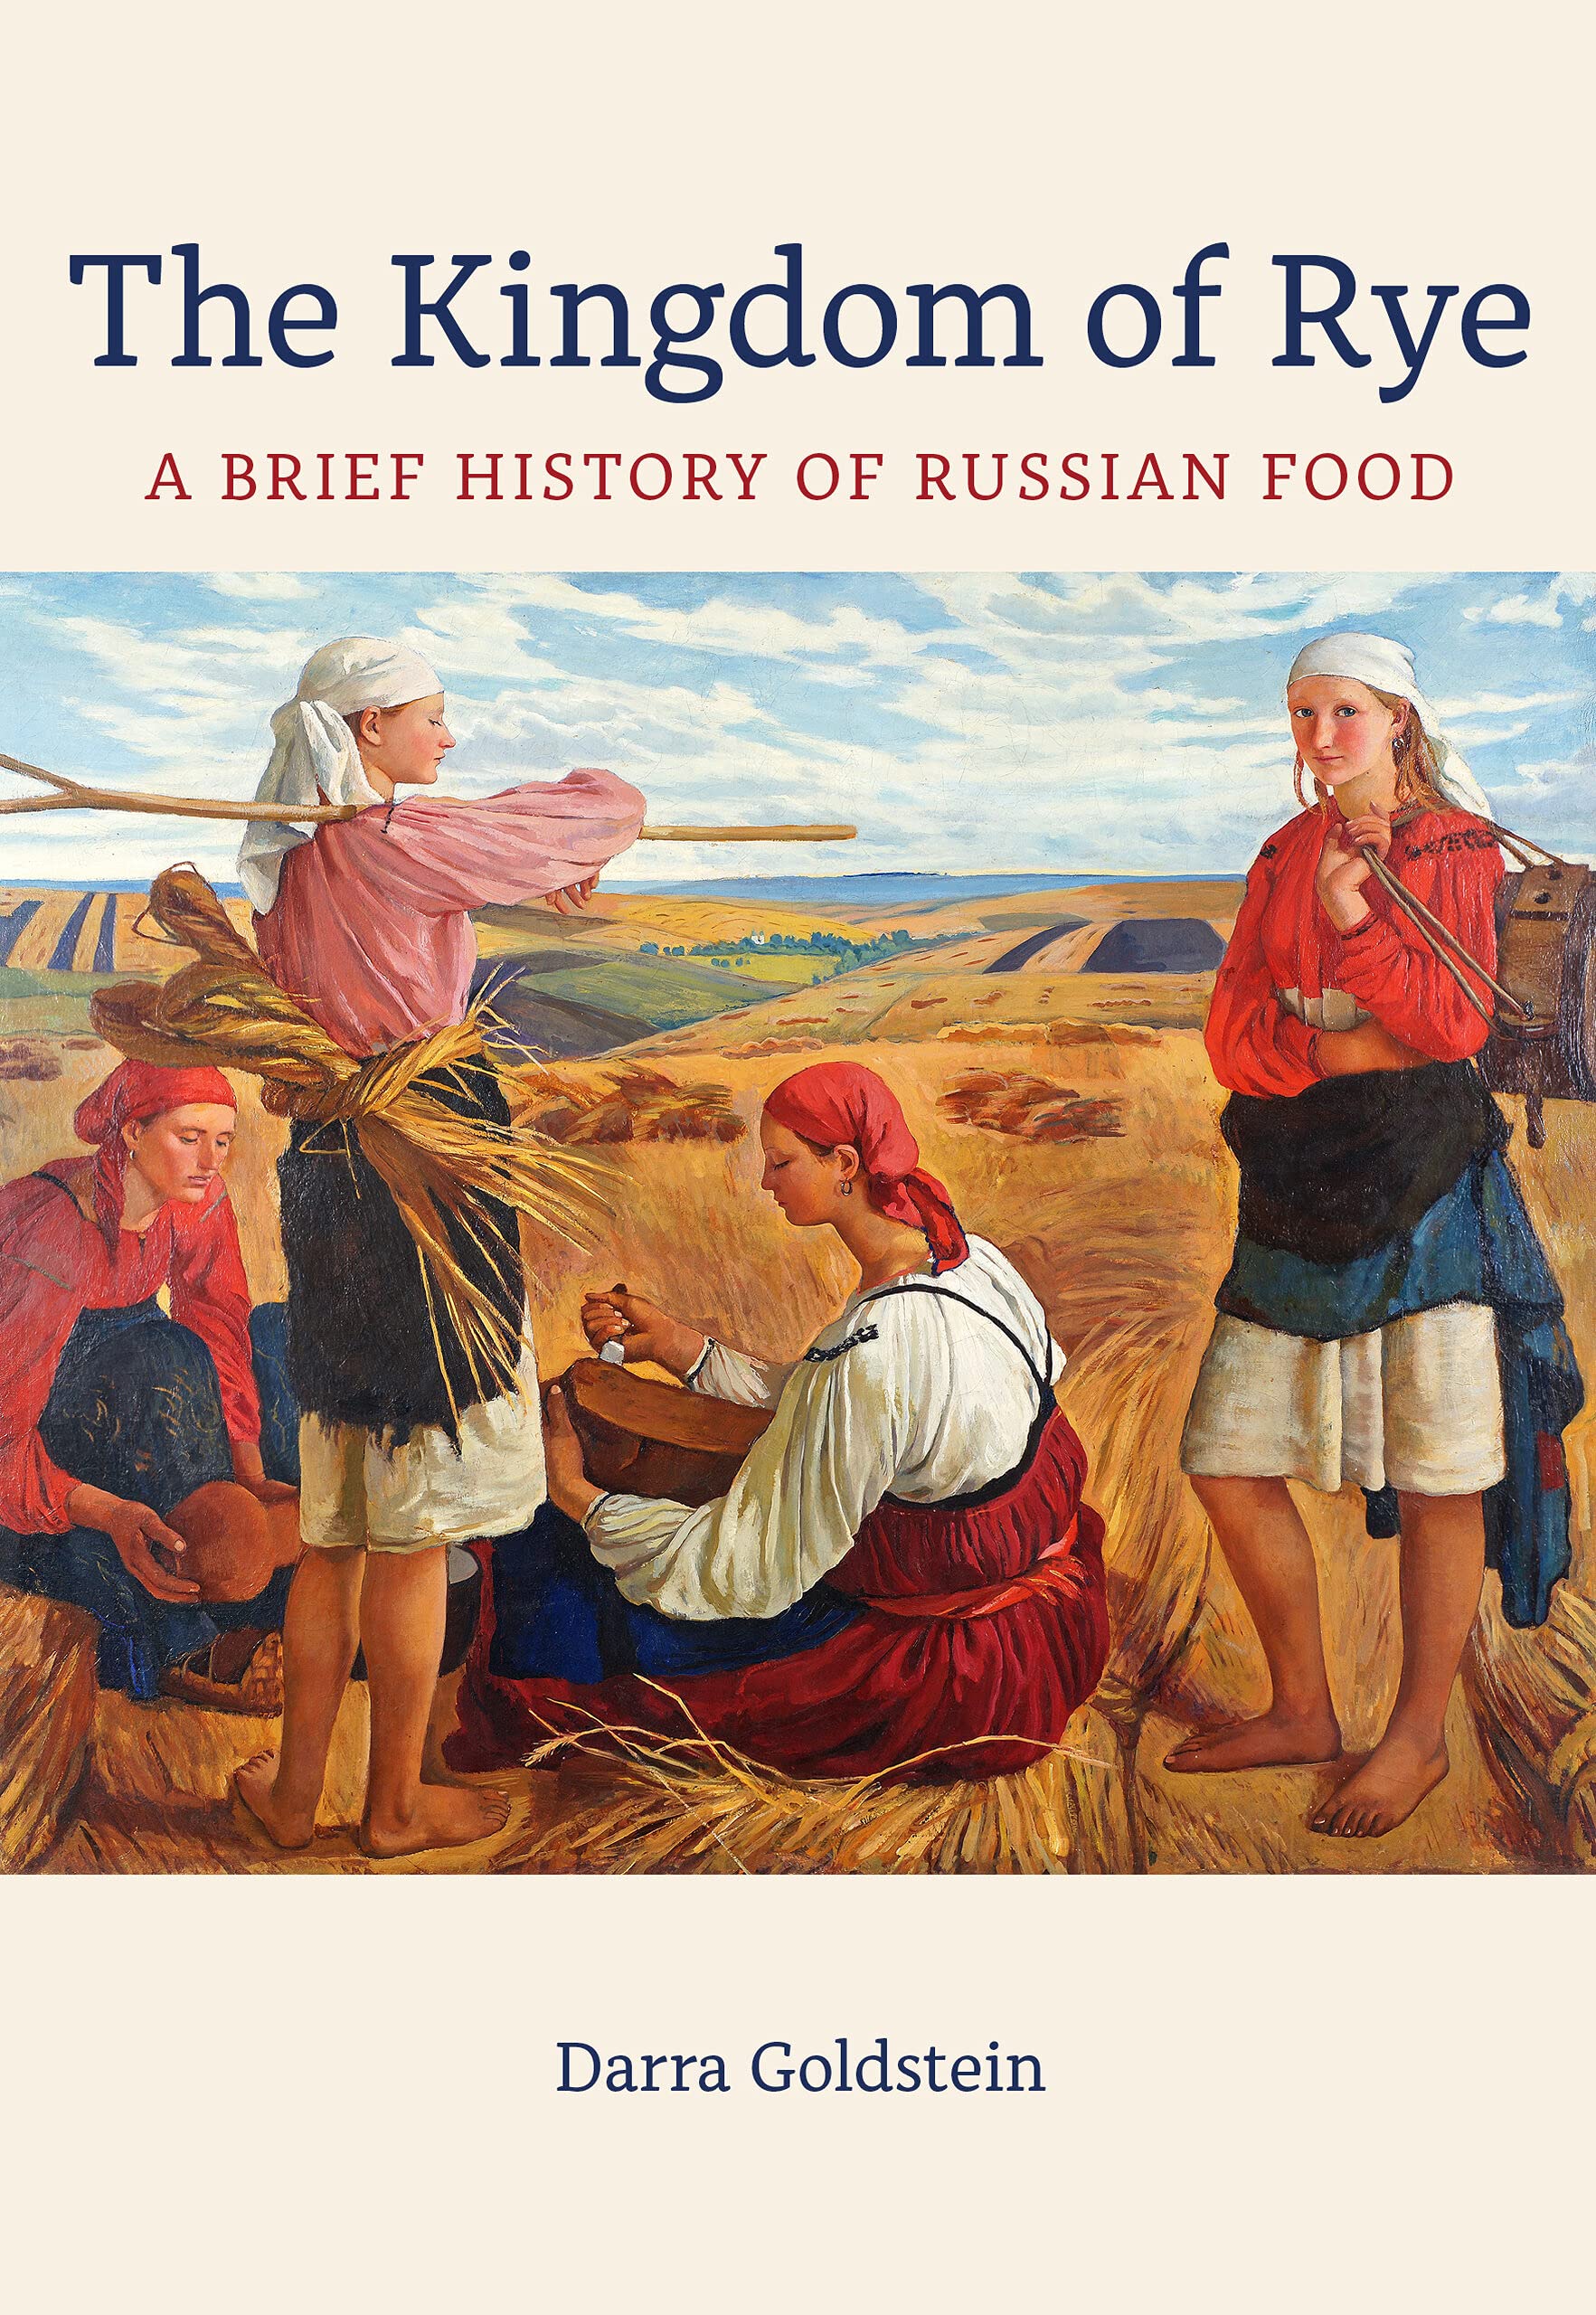 The Kingdom of Rye: A Brief History of Russian Food (Darra Goldstein) *Signed*